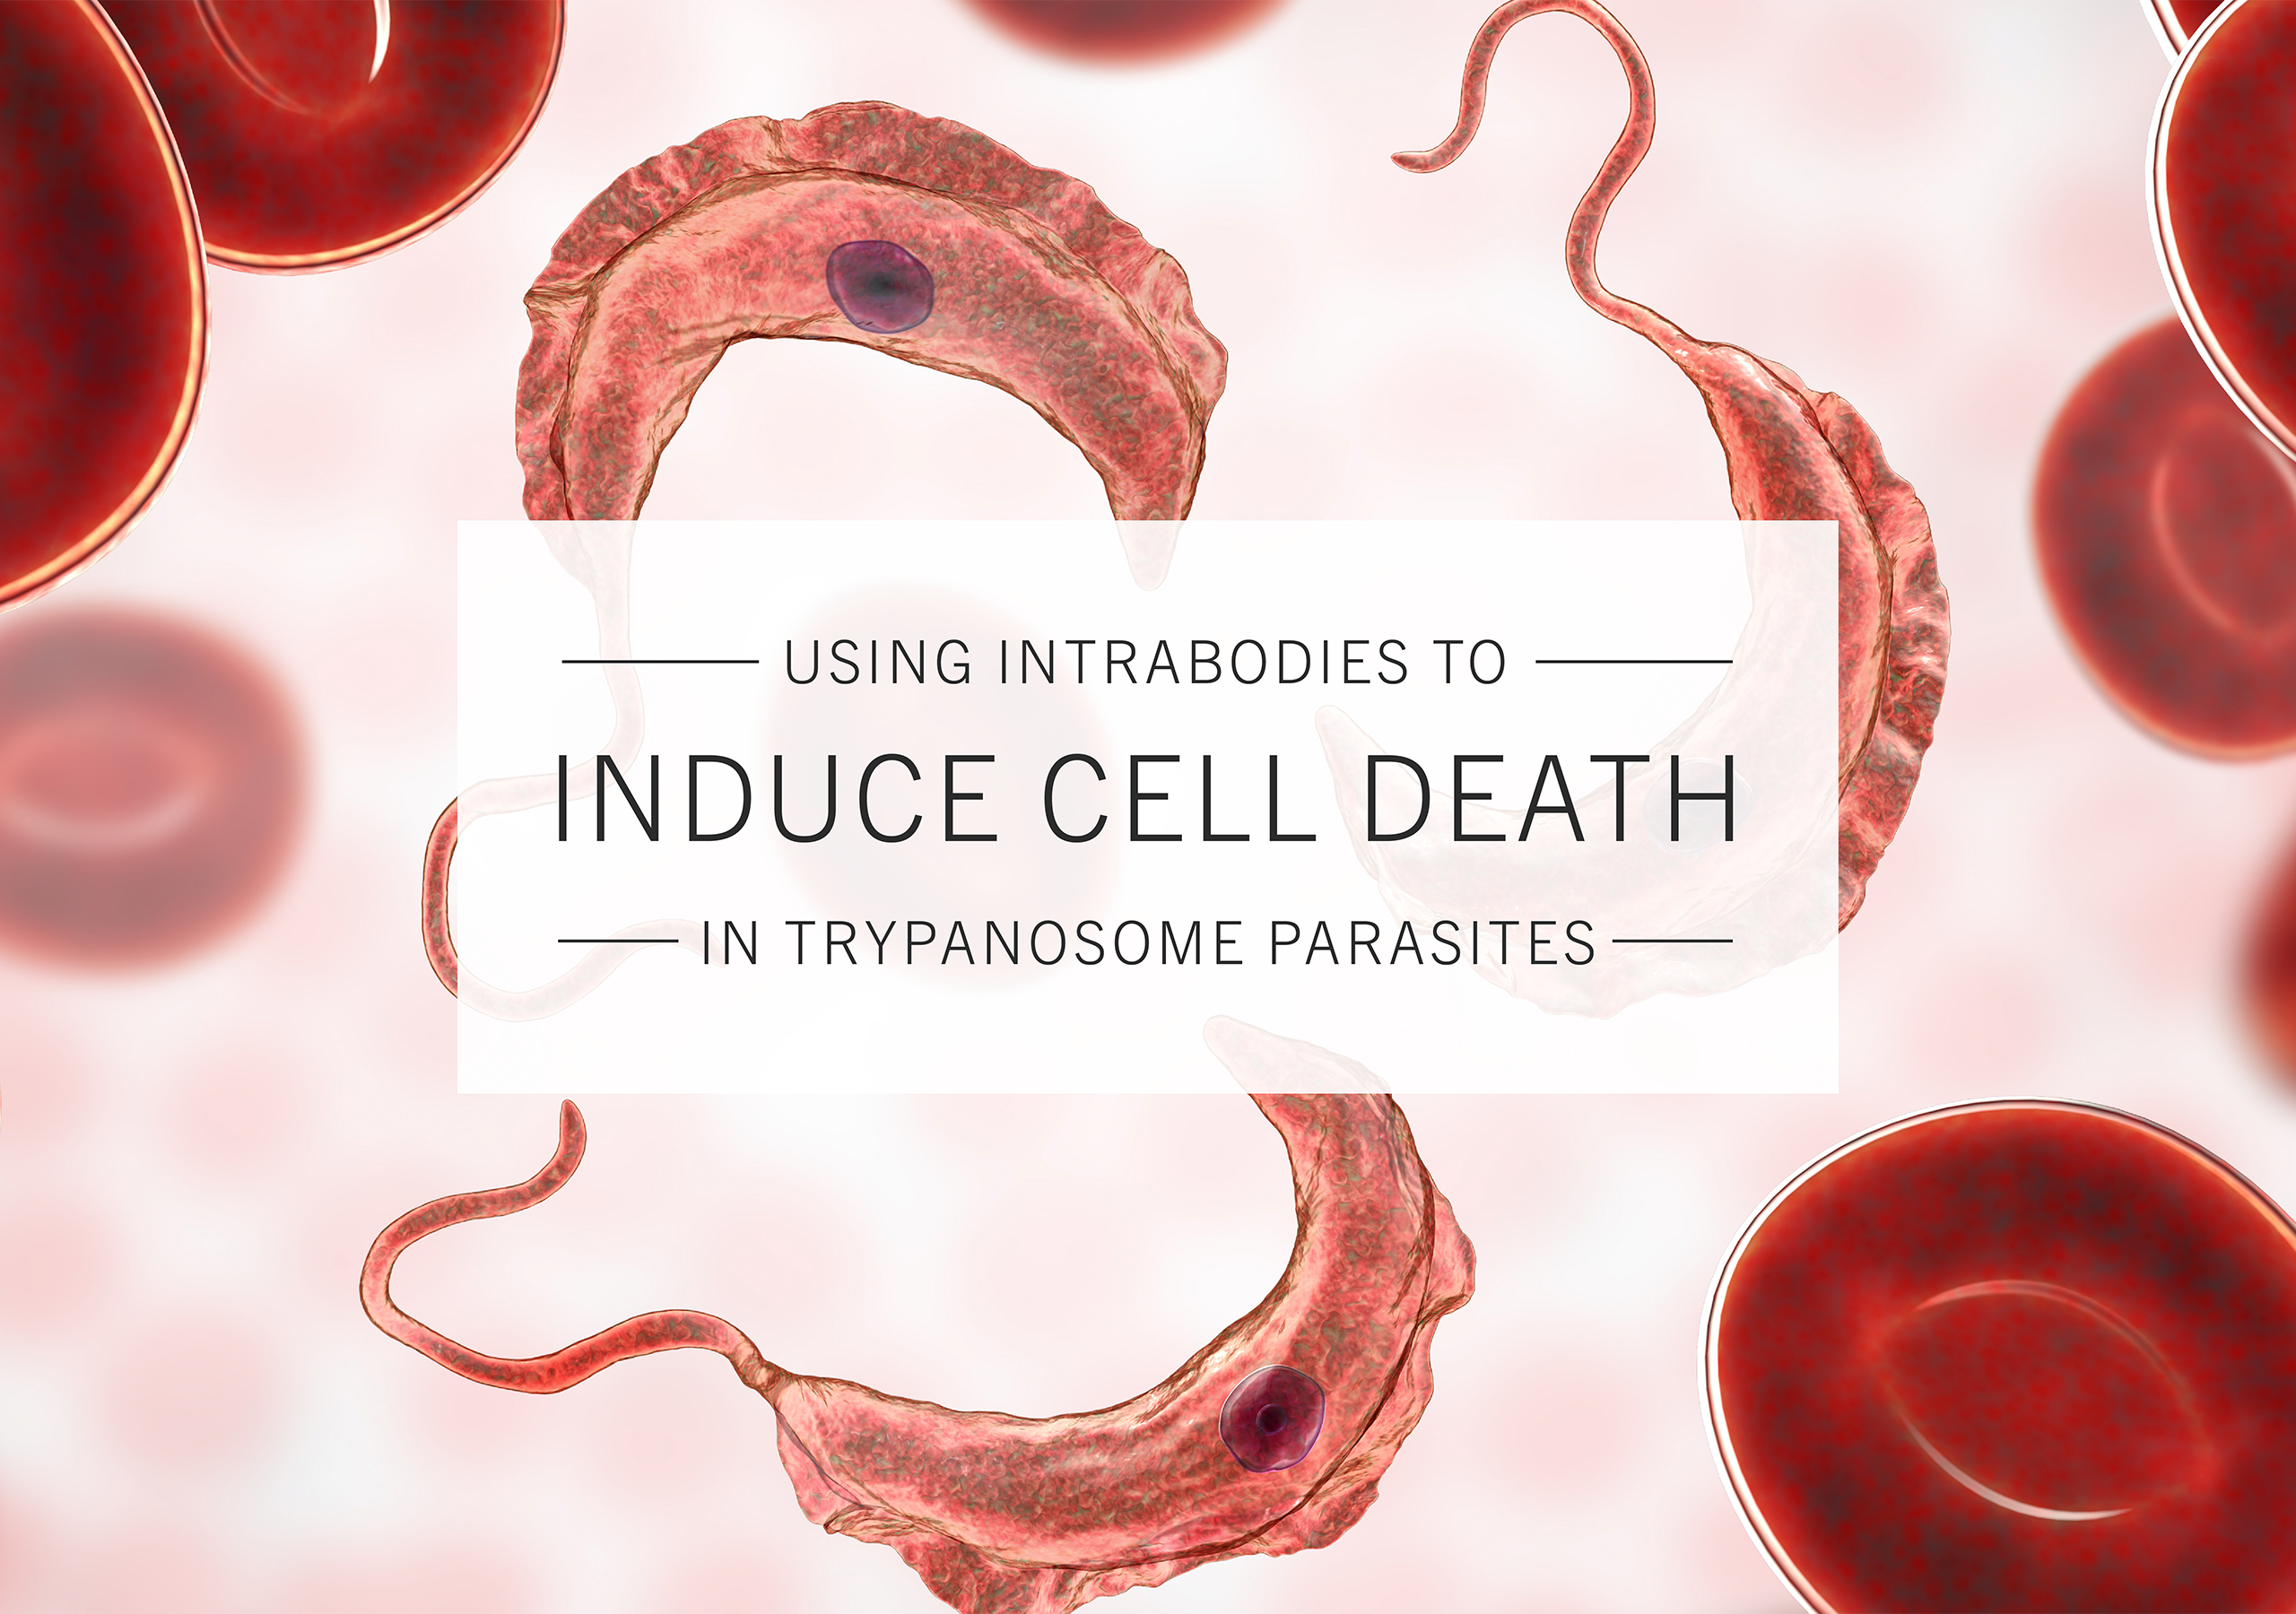 Professor Derrick Robinson | Using Intrabodies to Induce Cell Death in Trypanosome Parasites